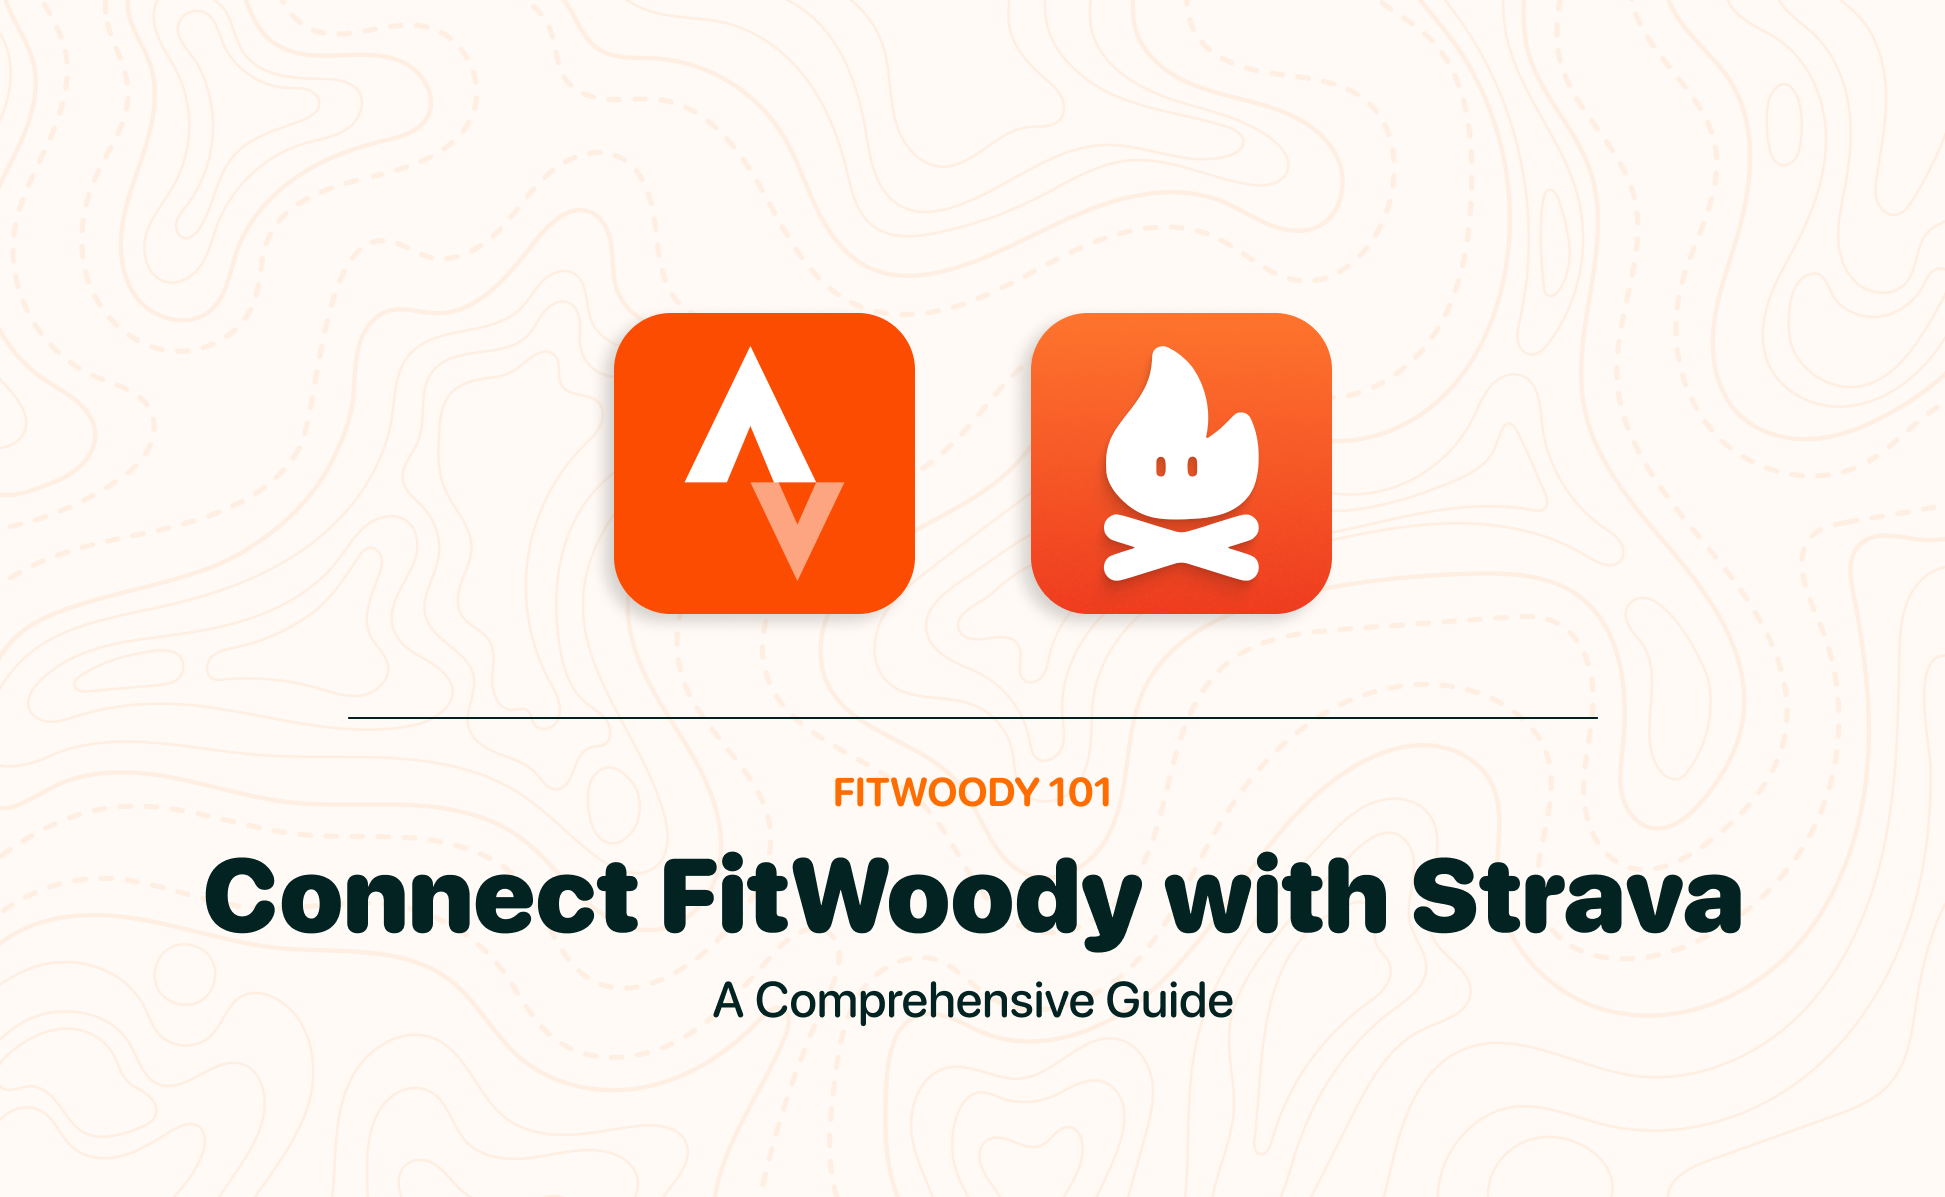 Connect FitWoody with Strava